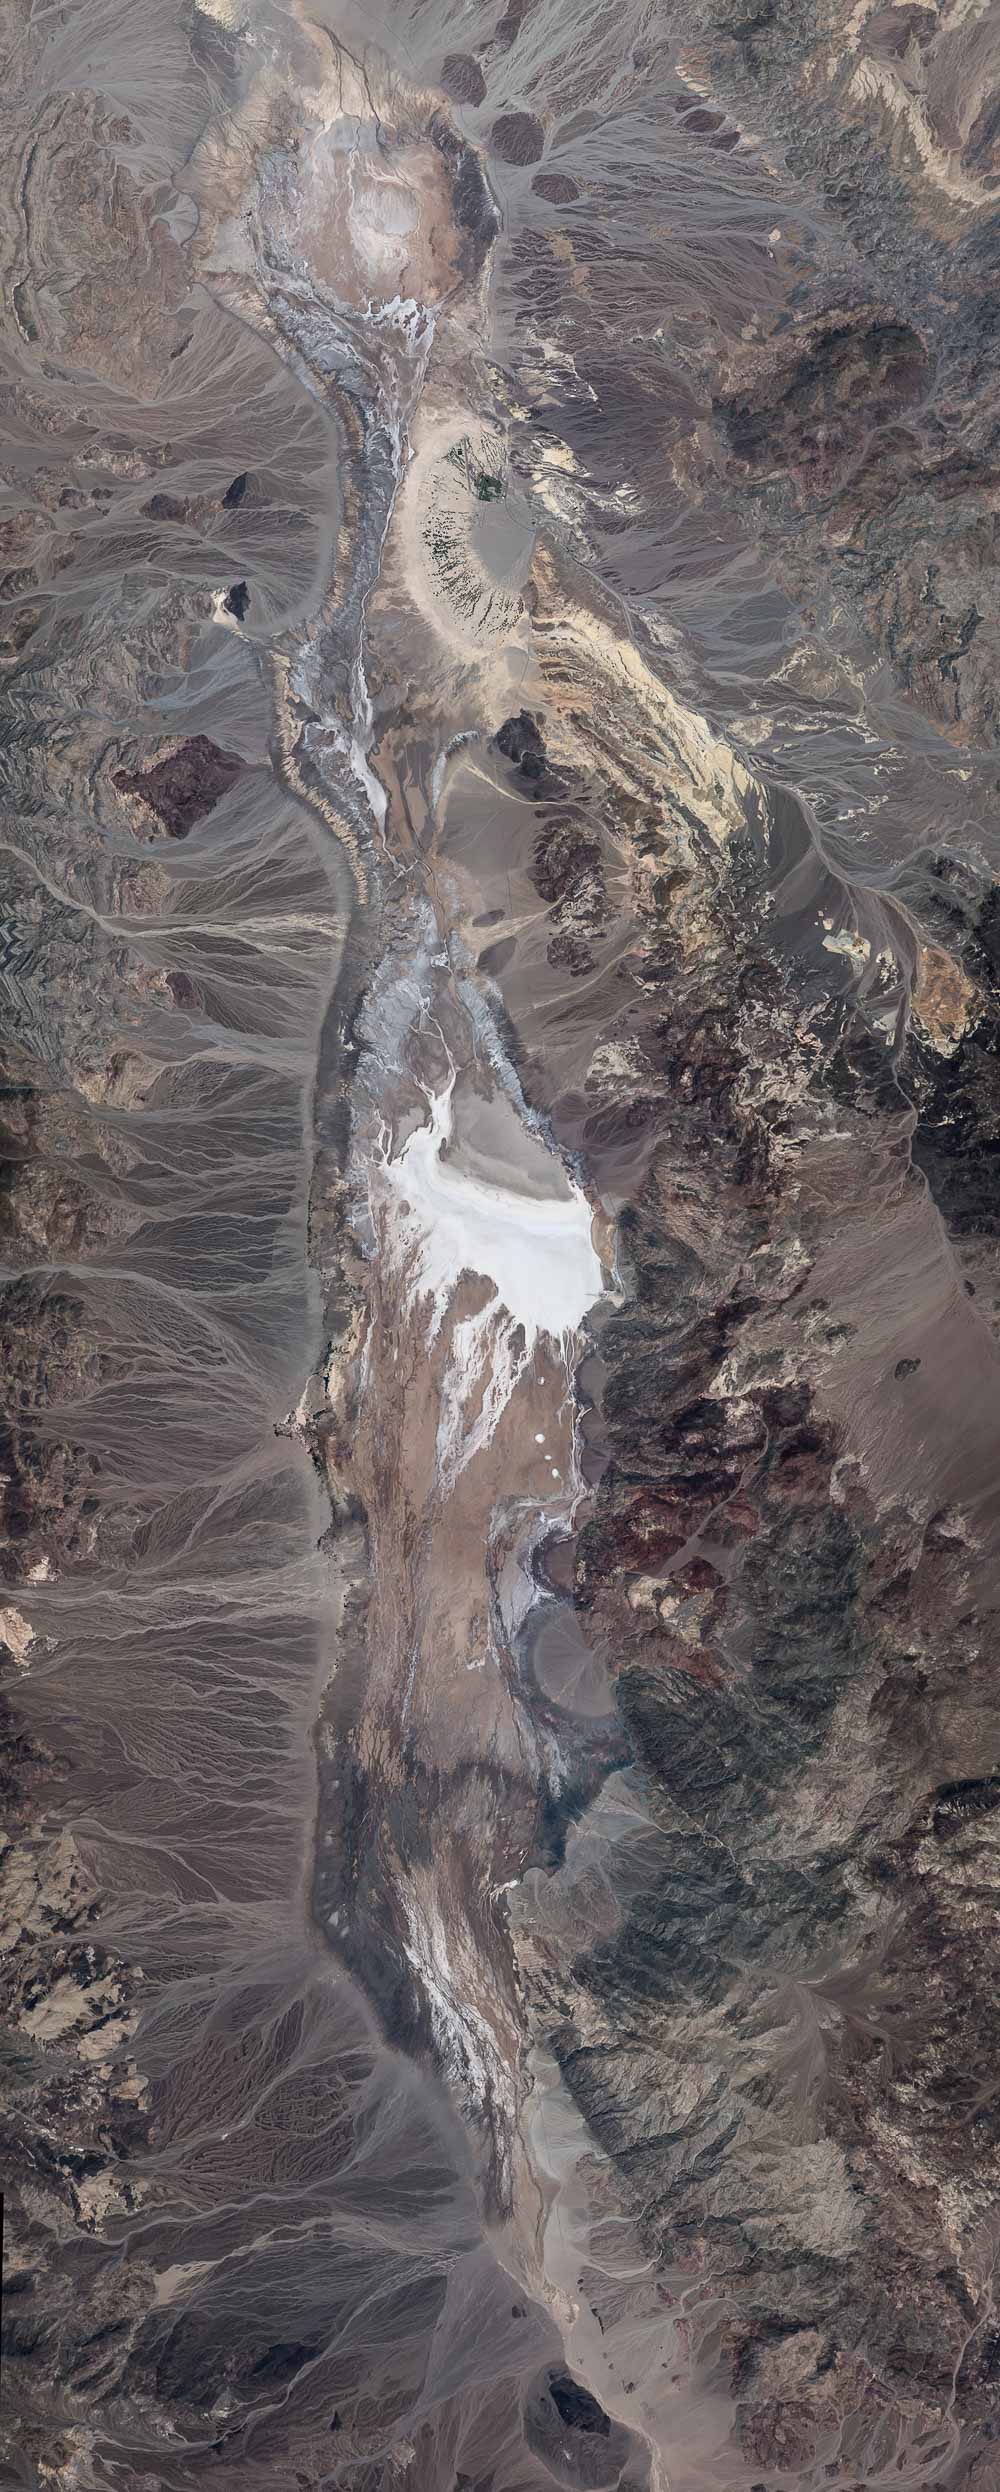 Death Valley National Park seen from space - Credit NASA Jeff Williams